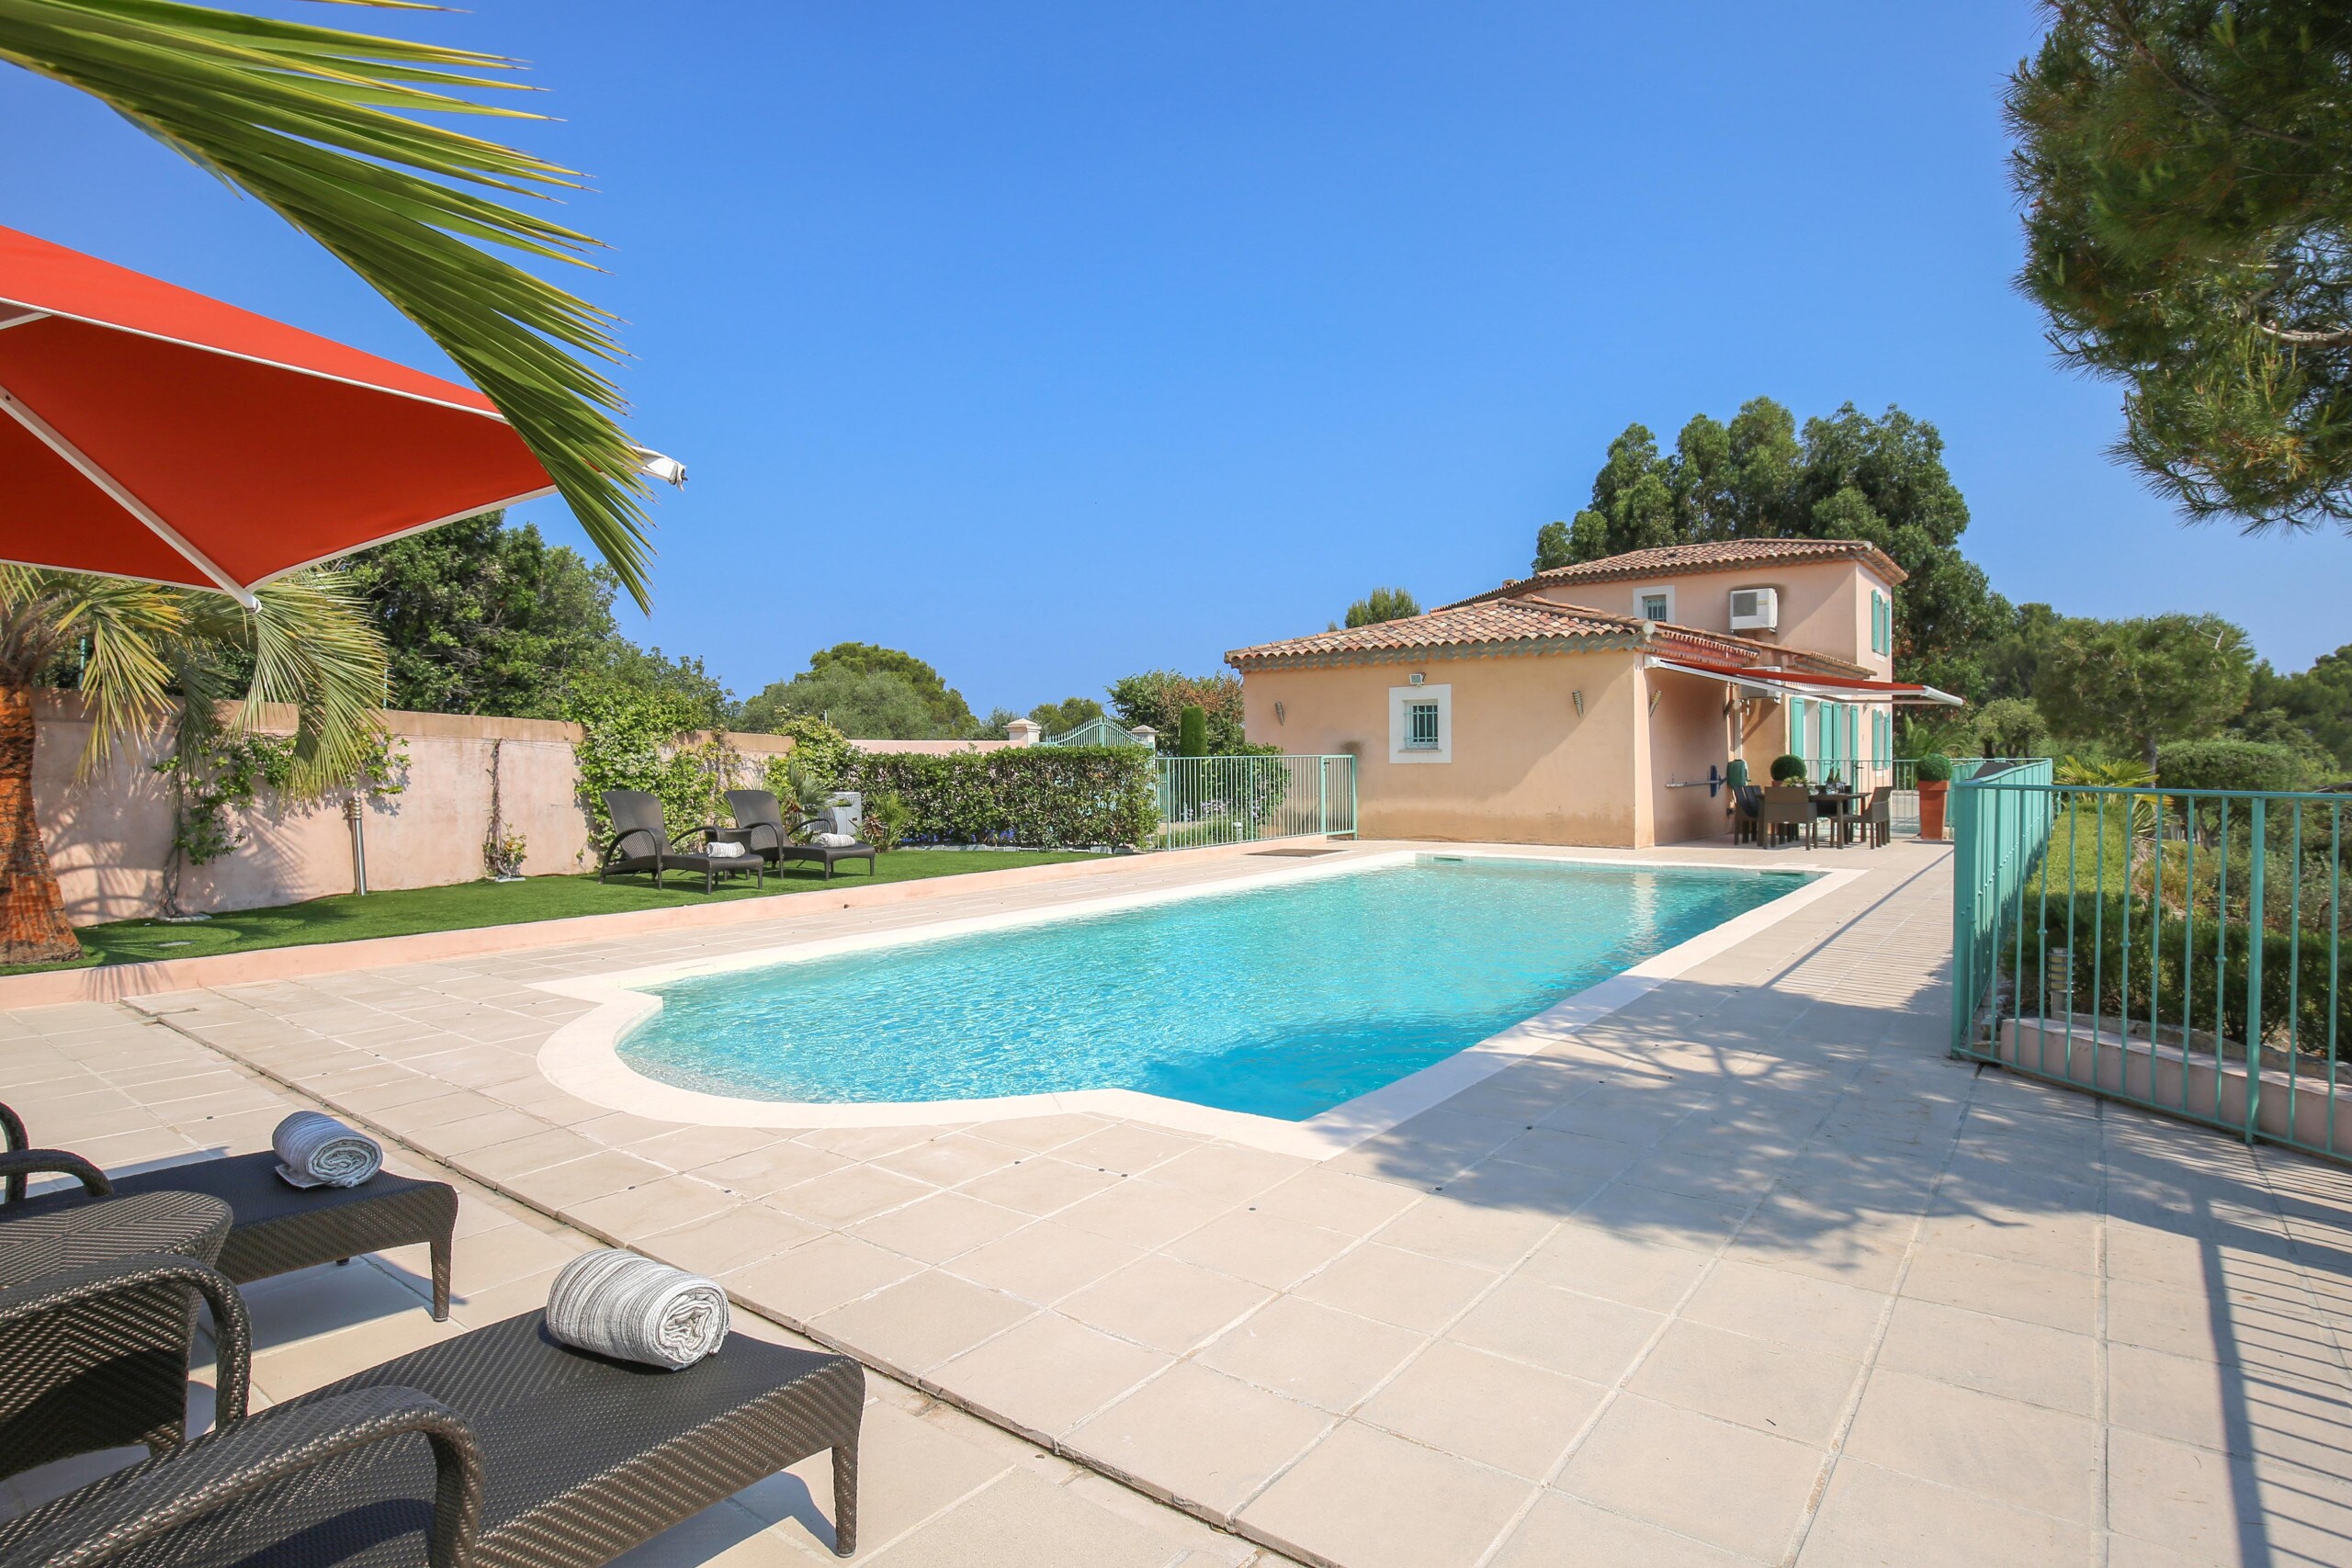 Property Image 2 - Lovely 4-bedroom villa with heated pool, outdoor jacuzzi and amazing views